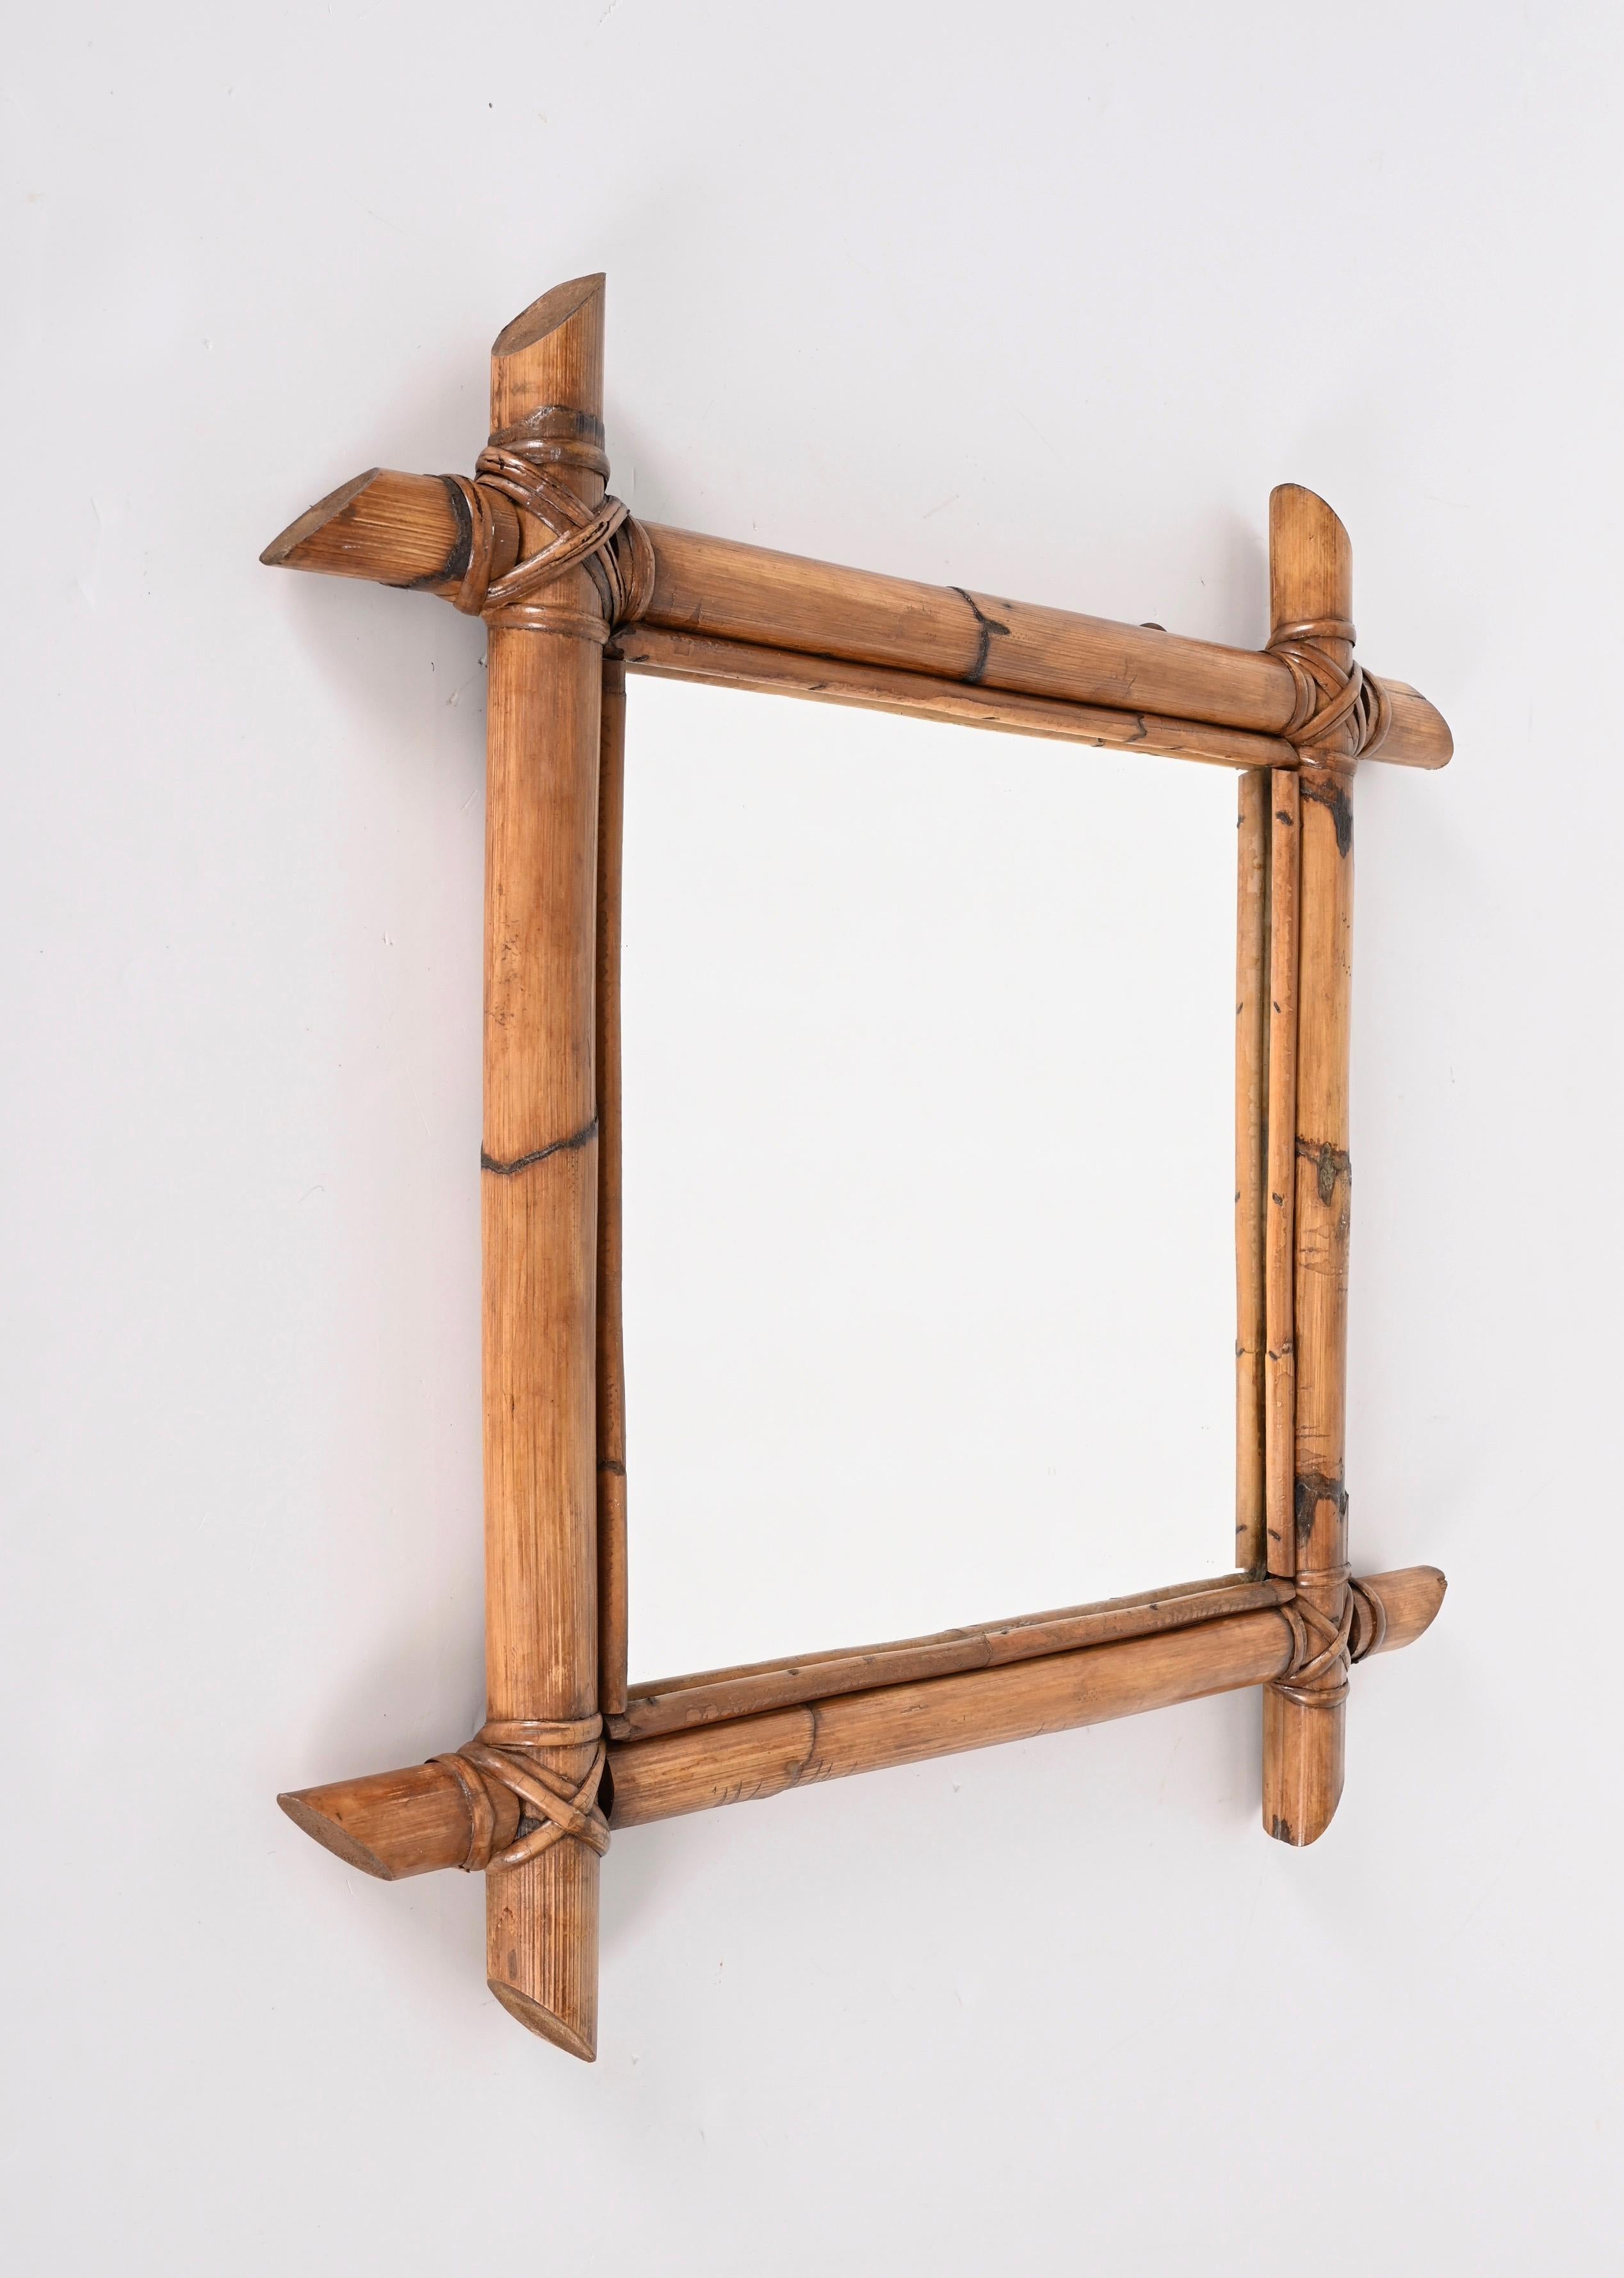 Midcentury Square Italian Mirror with Bamboo Woven Wicker Frame, 1950s For Sale 6